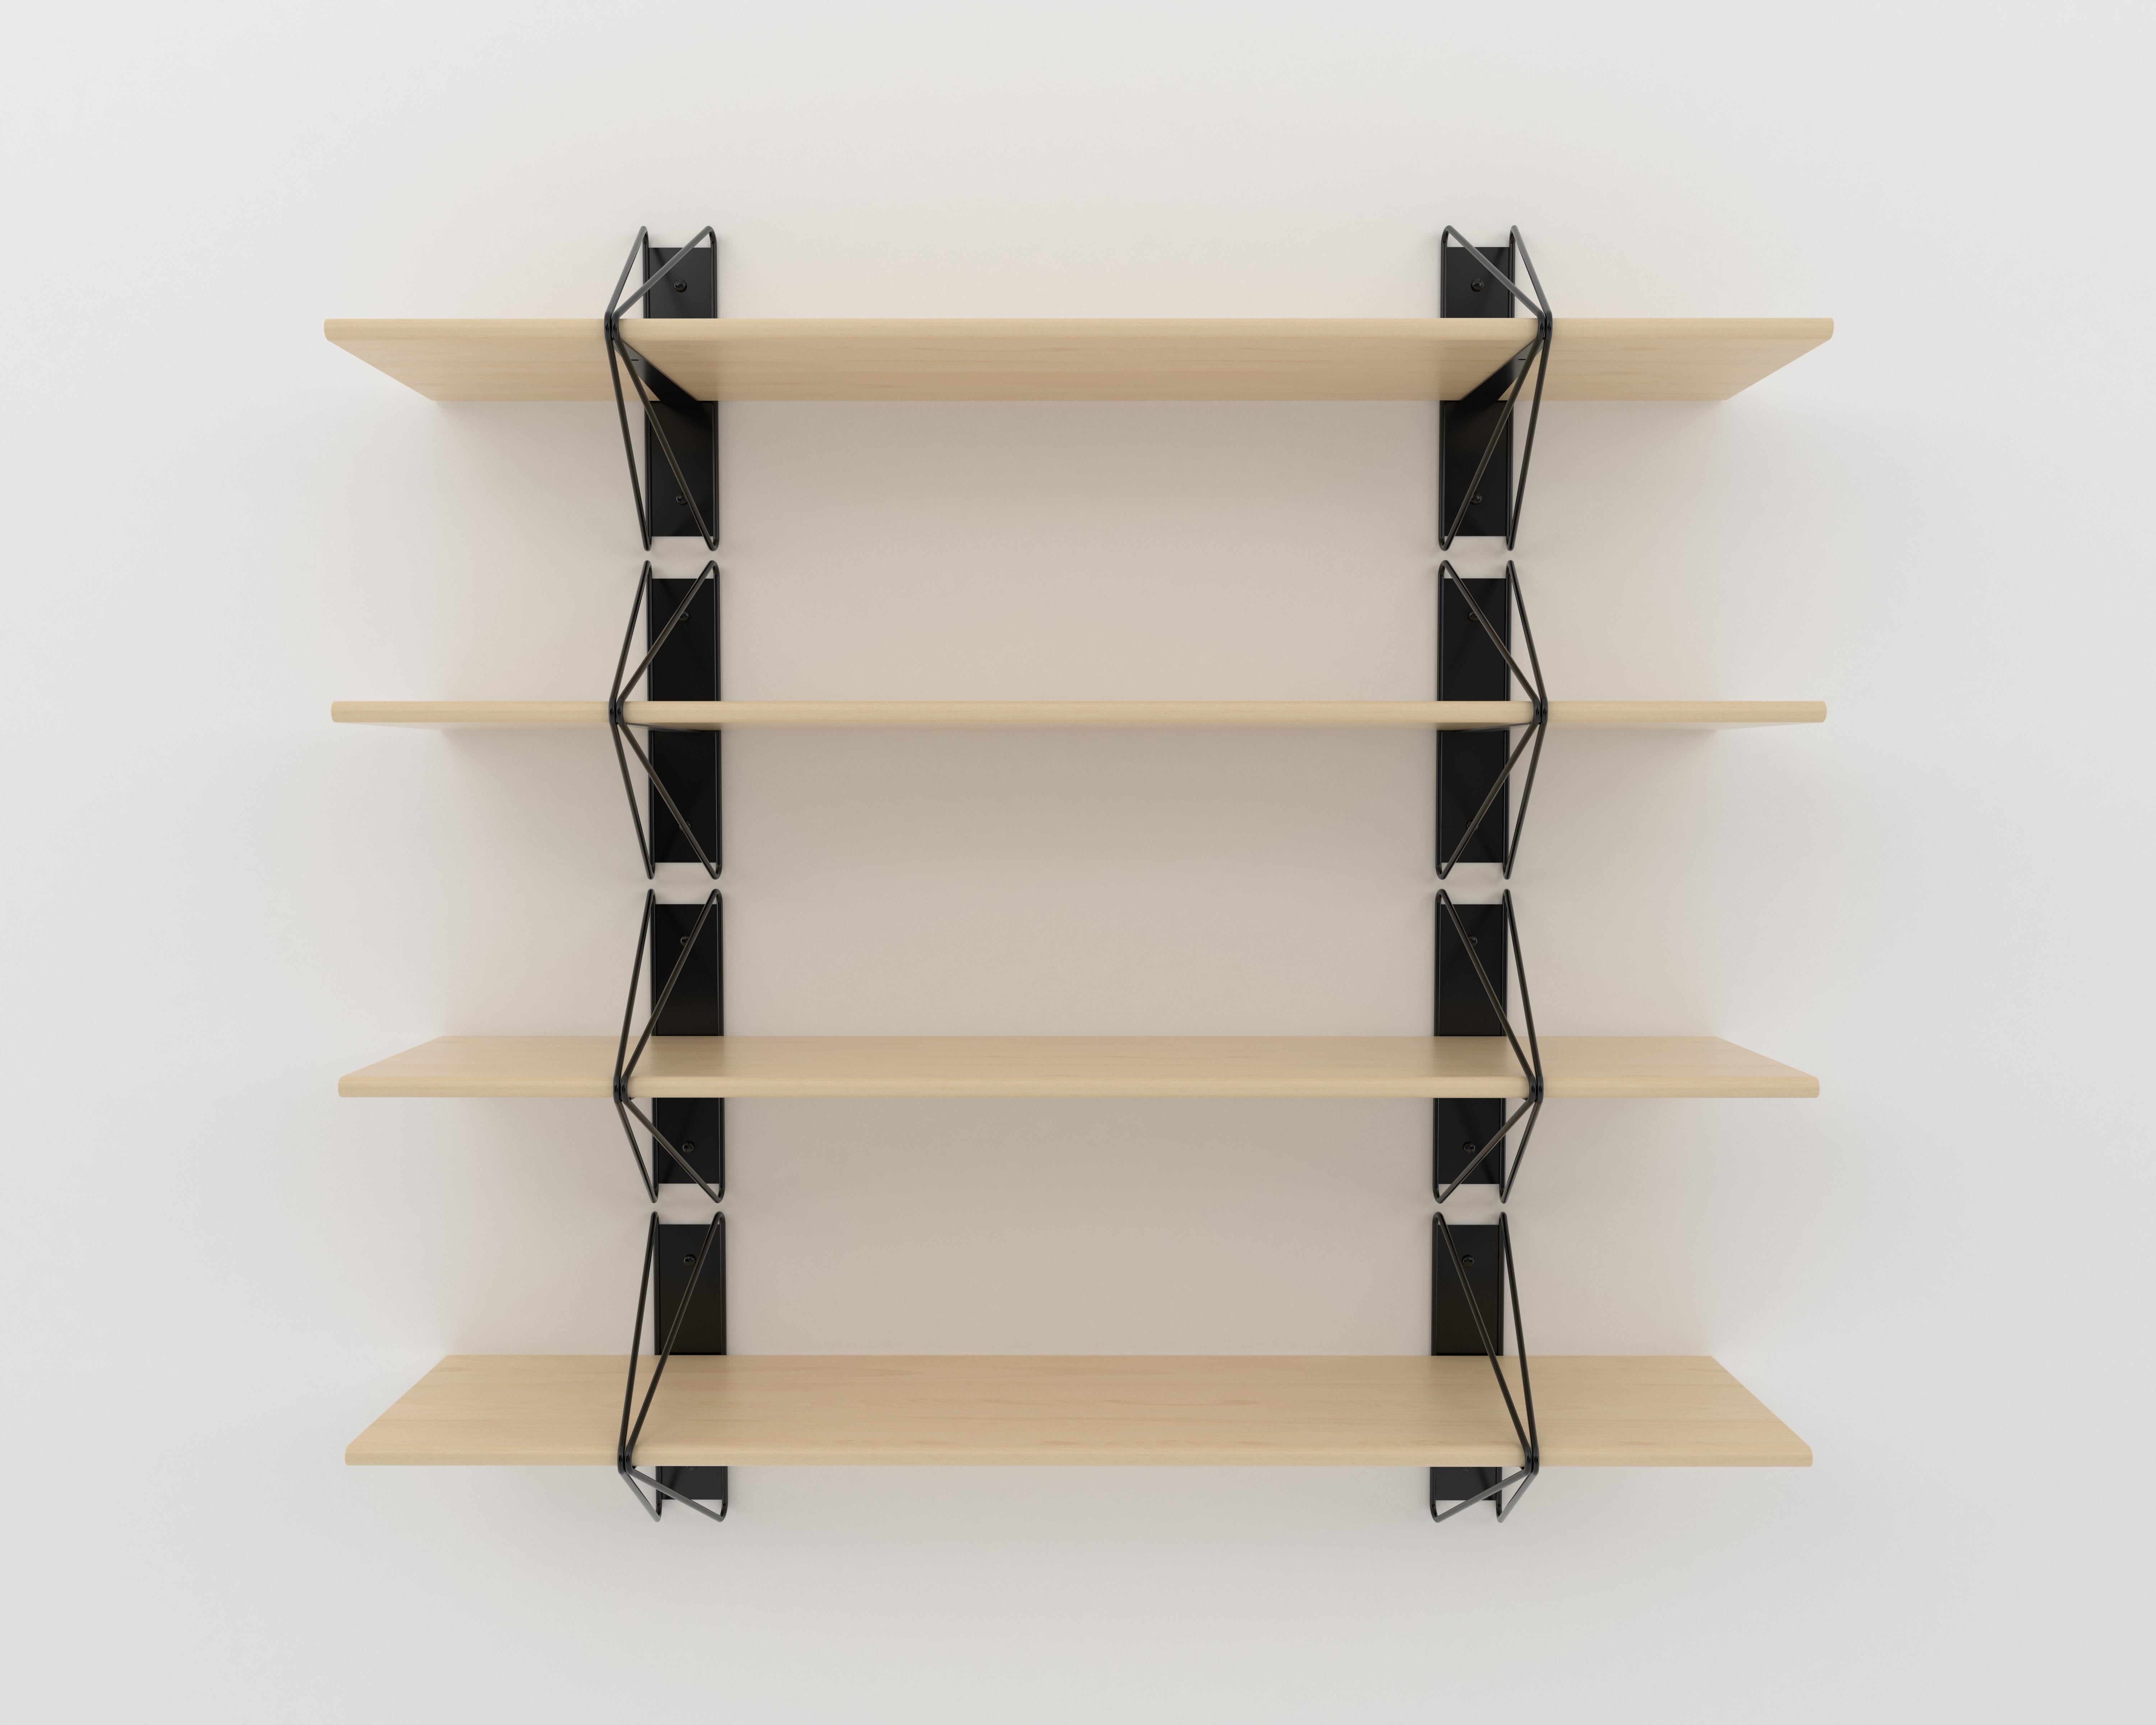 Powder-Coated Set of 2 Strut Shelves from Souda, White and Maple, Made to Order For Sale